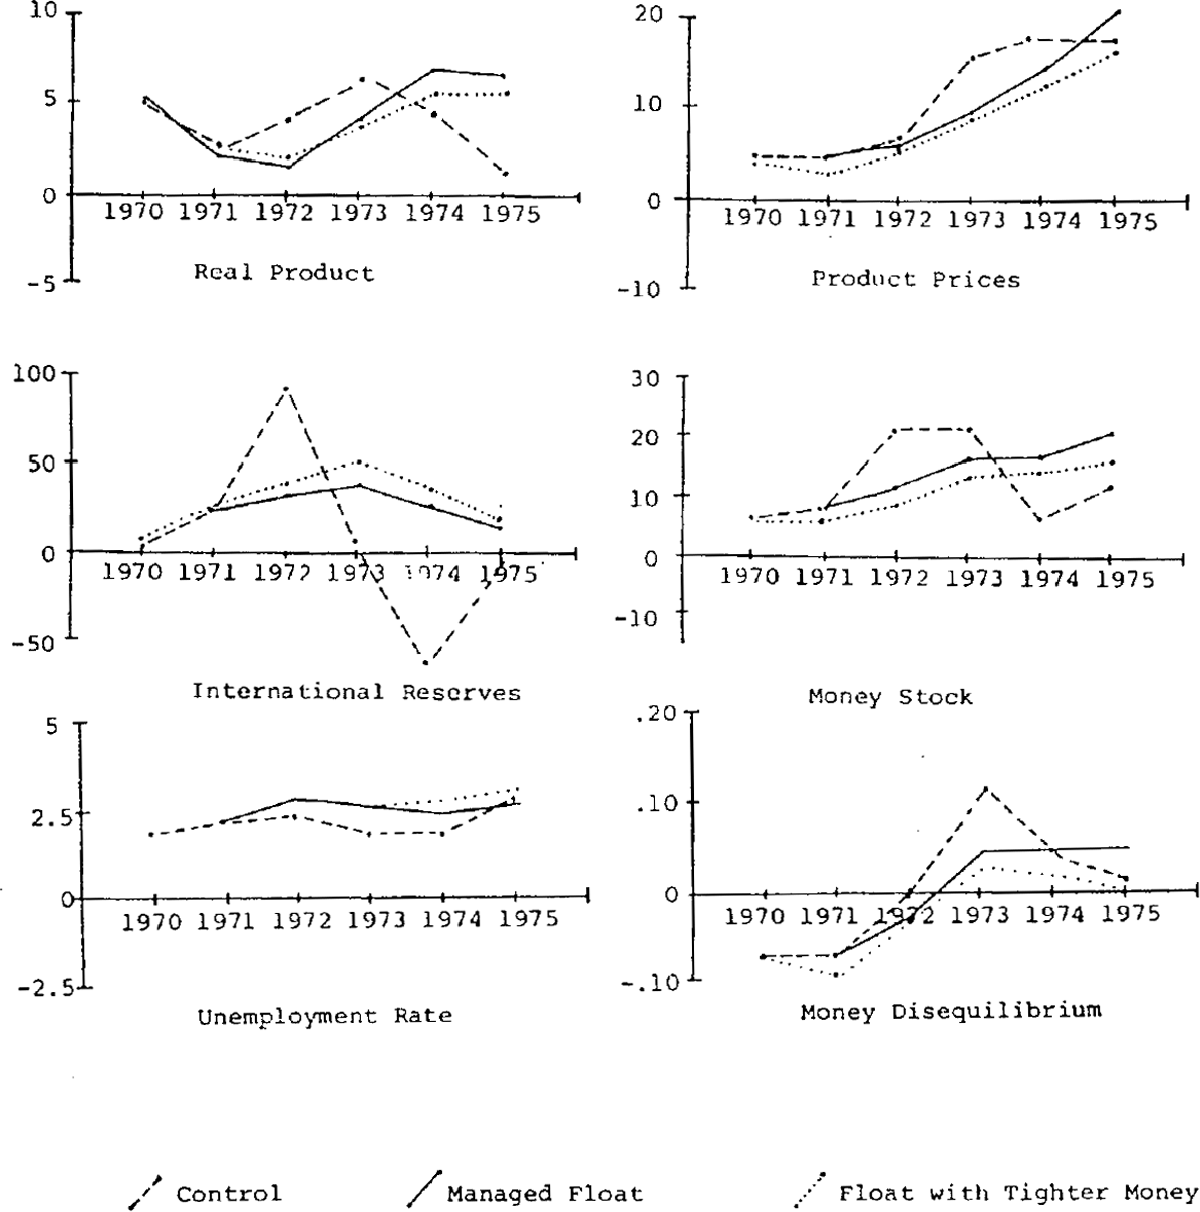 Figure 4: Managed Float and Tighter Money: Growth Rates of Key Variables, Unemployment Rate and a Measure of Money Disequilibrium